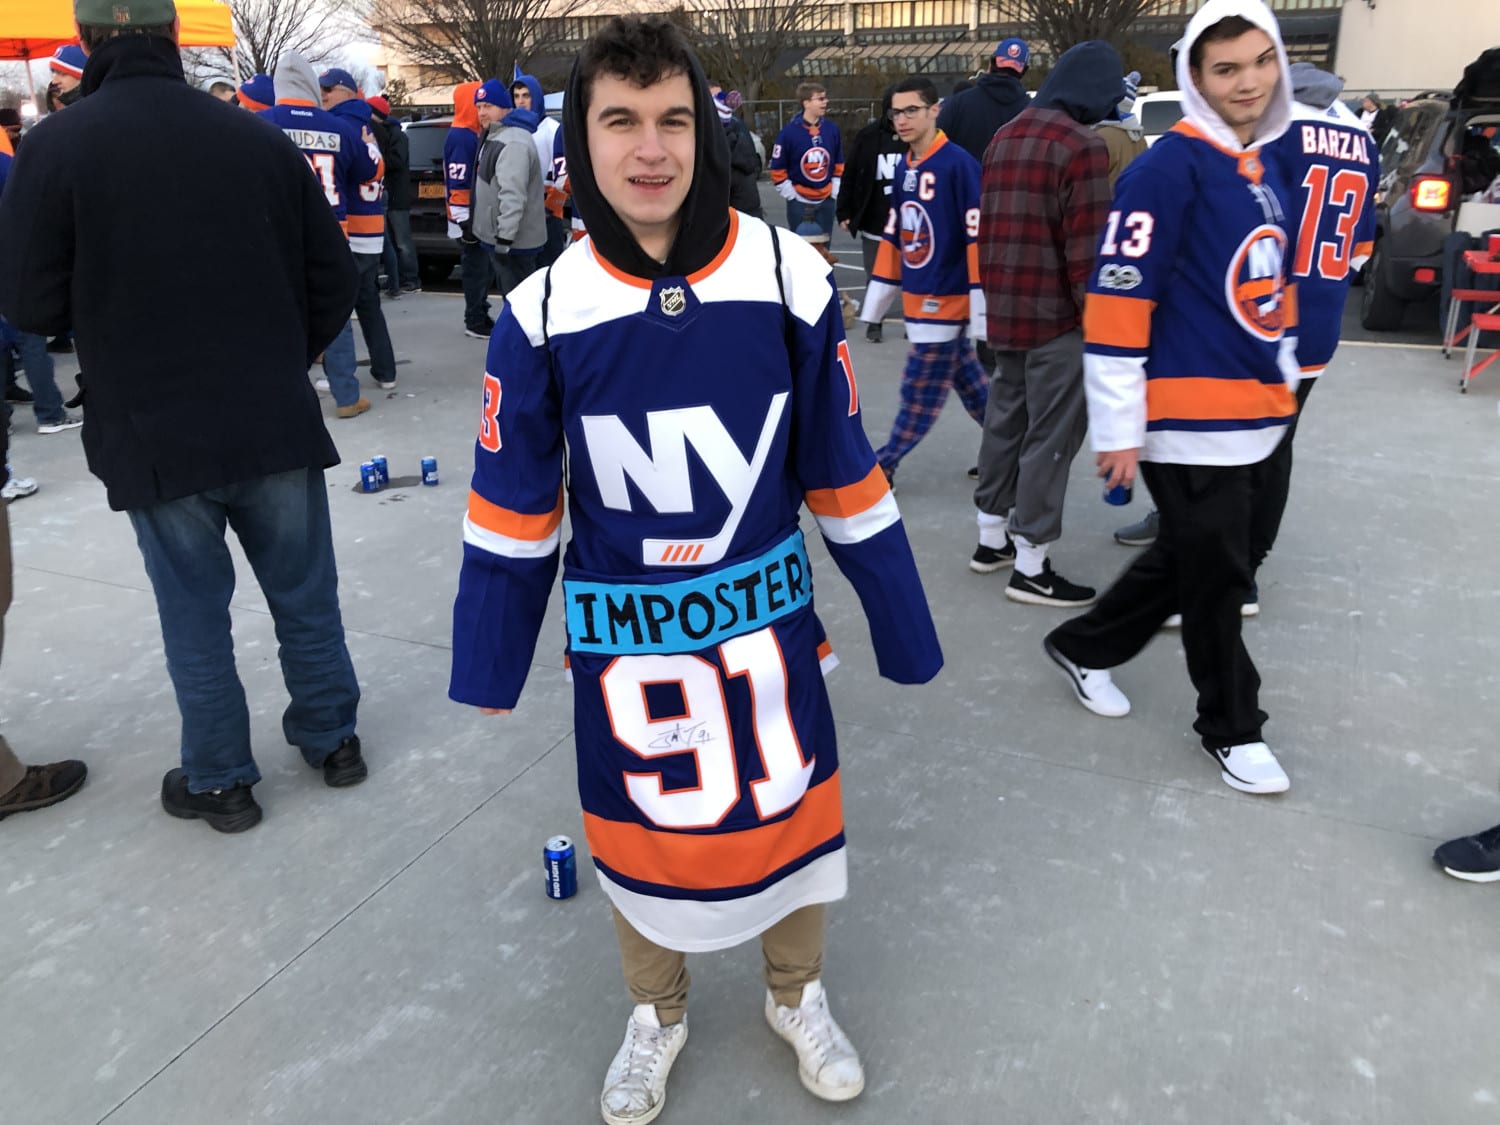 A 'mini invasion' of Whalers fans showed up for Islanders – Hurricanes game